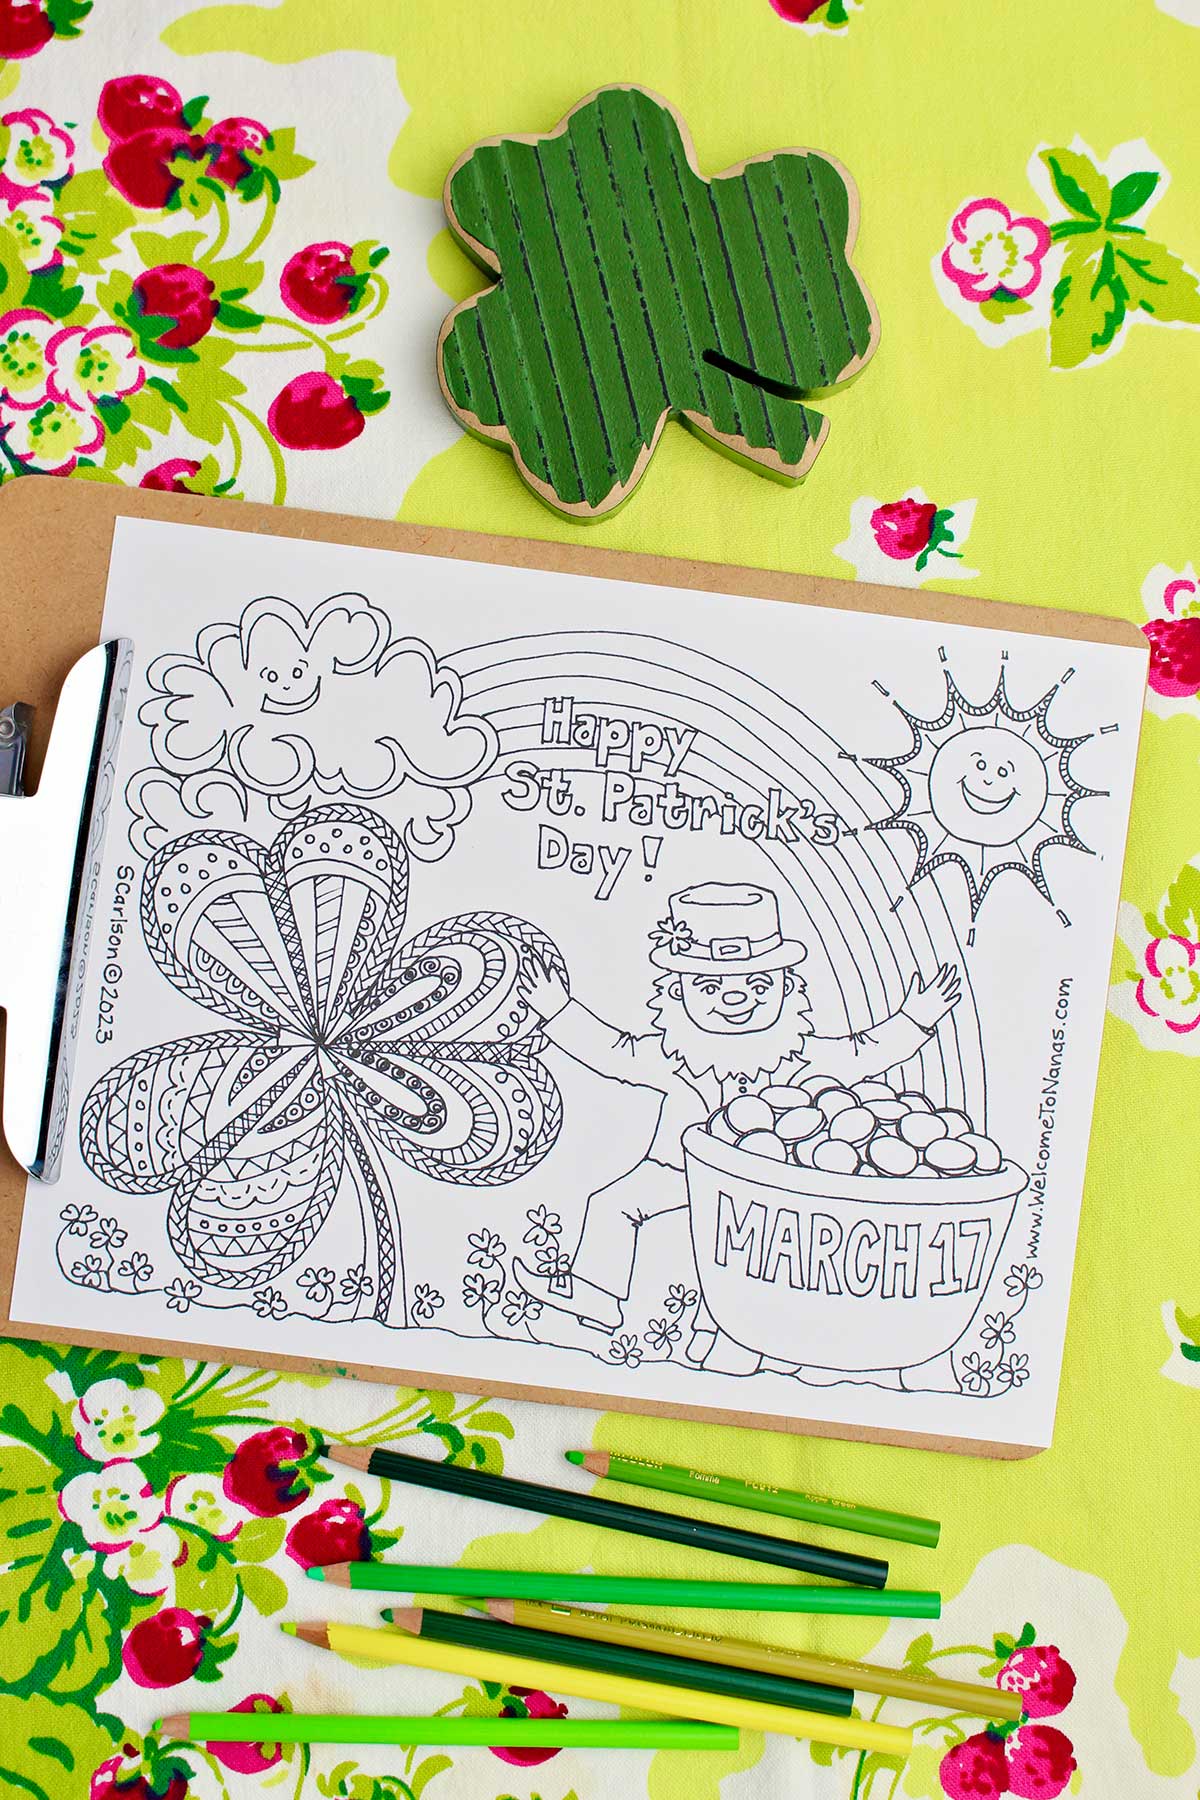 Uncolored St. Patrick's Day coloring page on a clip board resting on a green table cloth with strawberries on it with green colored pencils and a wooden shamrock near by.